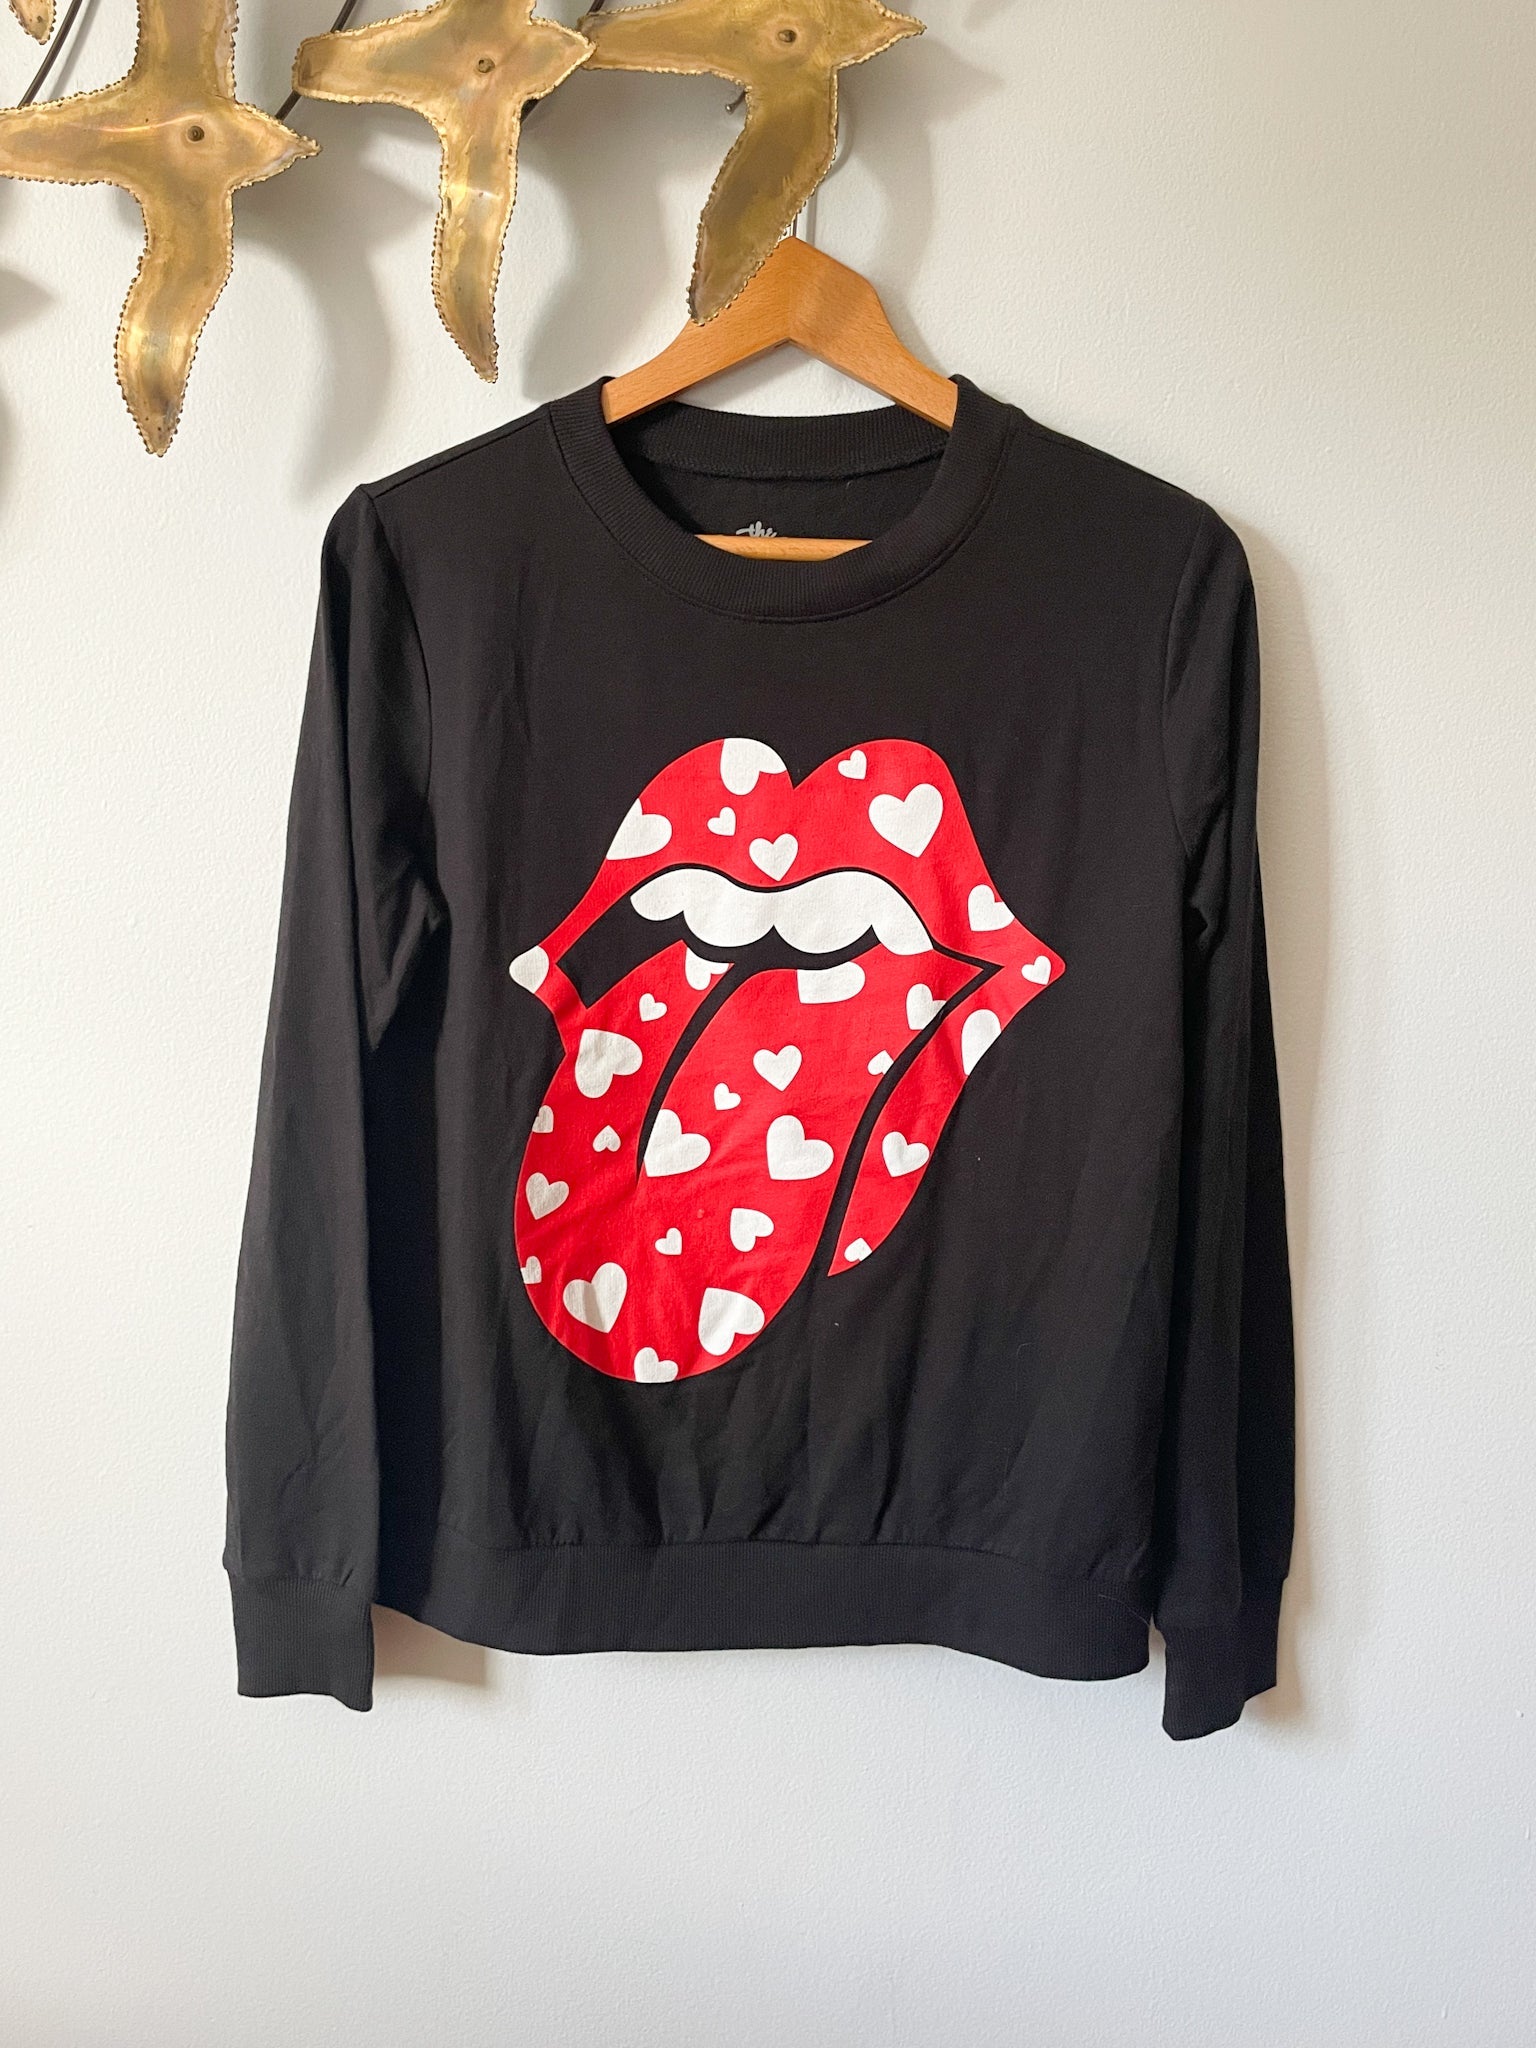 The Rolling Stones Official Band Crew Neck Sweater - XS/S